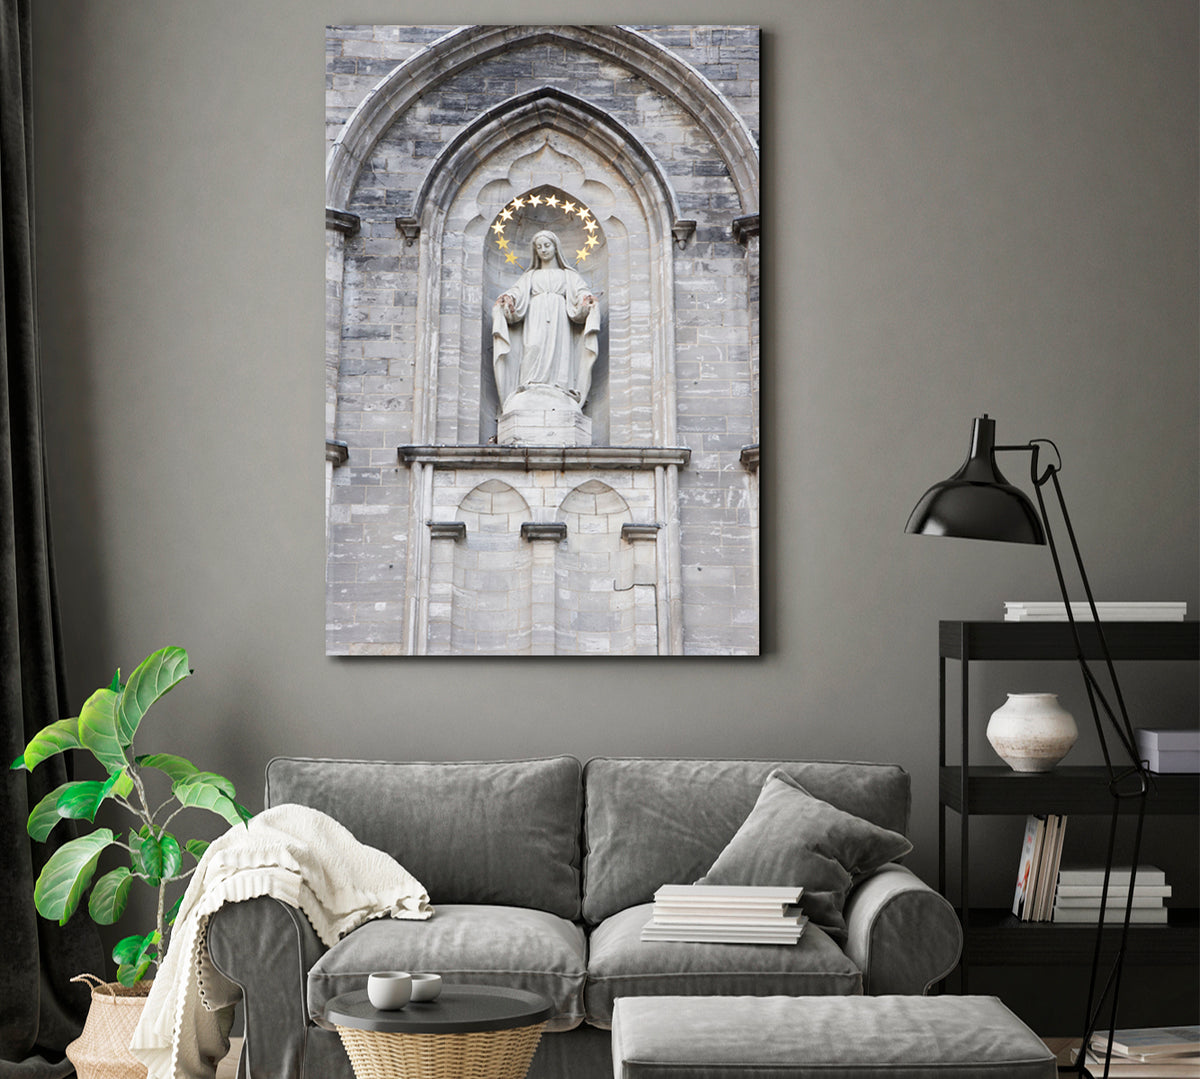 SHRINE Notre-Dame Basilica Historic Old Montreal Canada Canvas Print | Vertical Cities Wall Art Artesty 1 Panel 16"x24" 